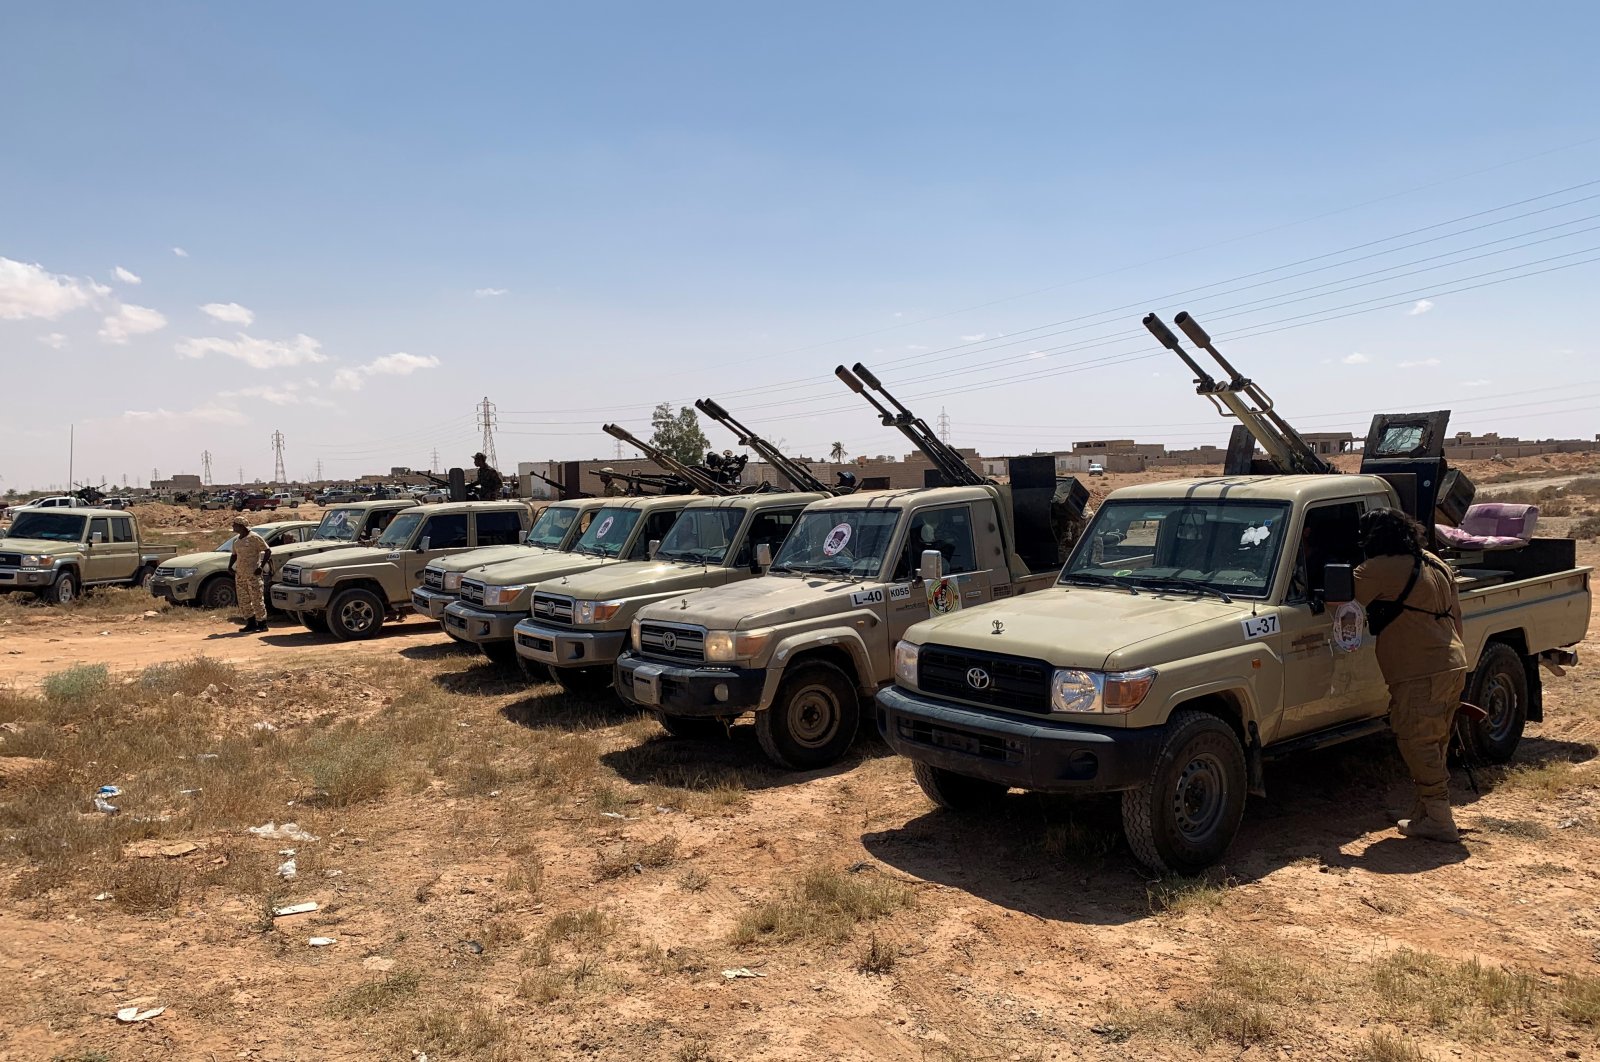 Troops loyal to Libya's internationally recognized government are seen in military vehicles as they prepare to head to Sirte, on the outskirts of Misrata, Libya, July 18, 2020. (Reuters Photo)